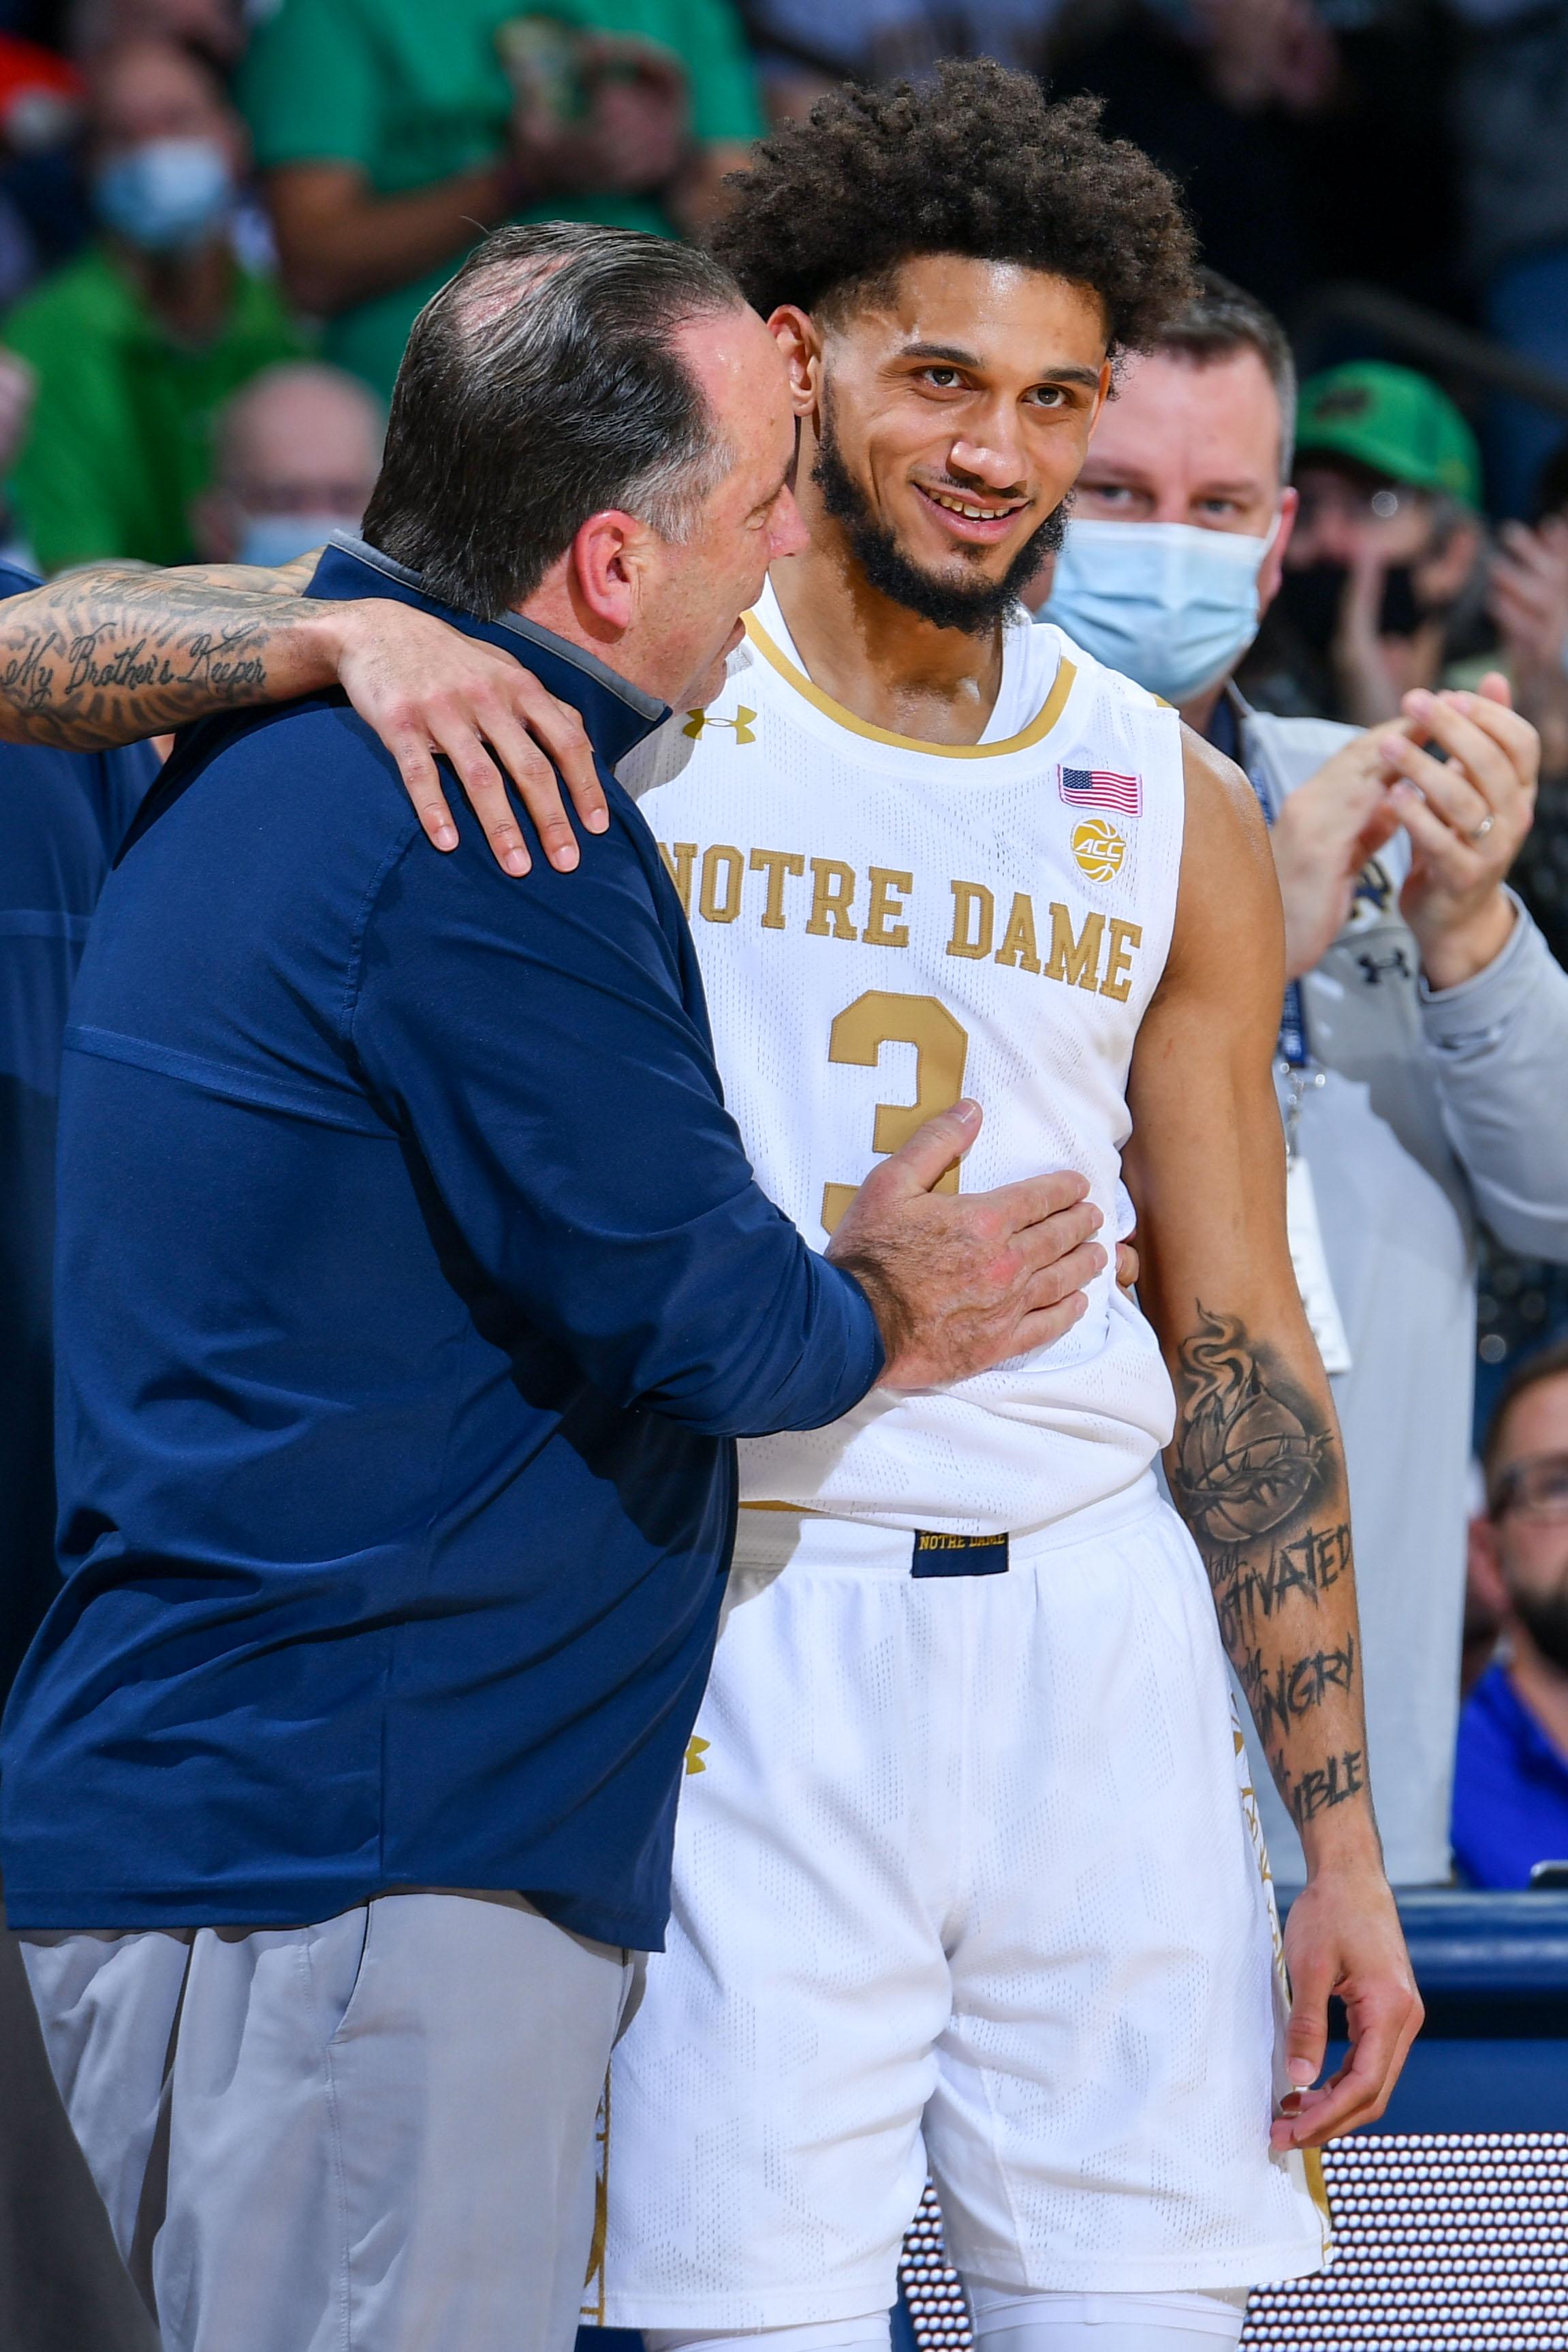 Notre Dame March Madness Schedule: Next Game Time, Date, TV Channel for 2022 NCAA Basketball Tournament